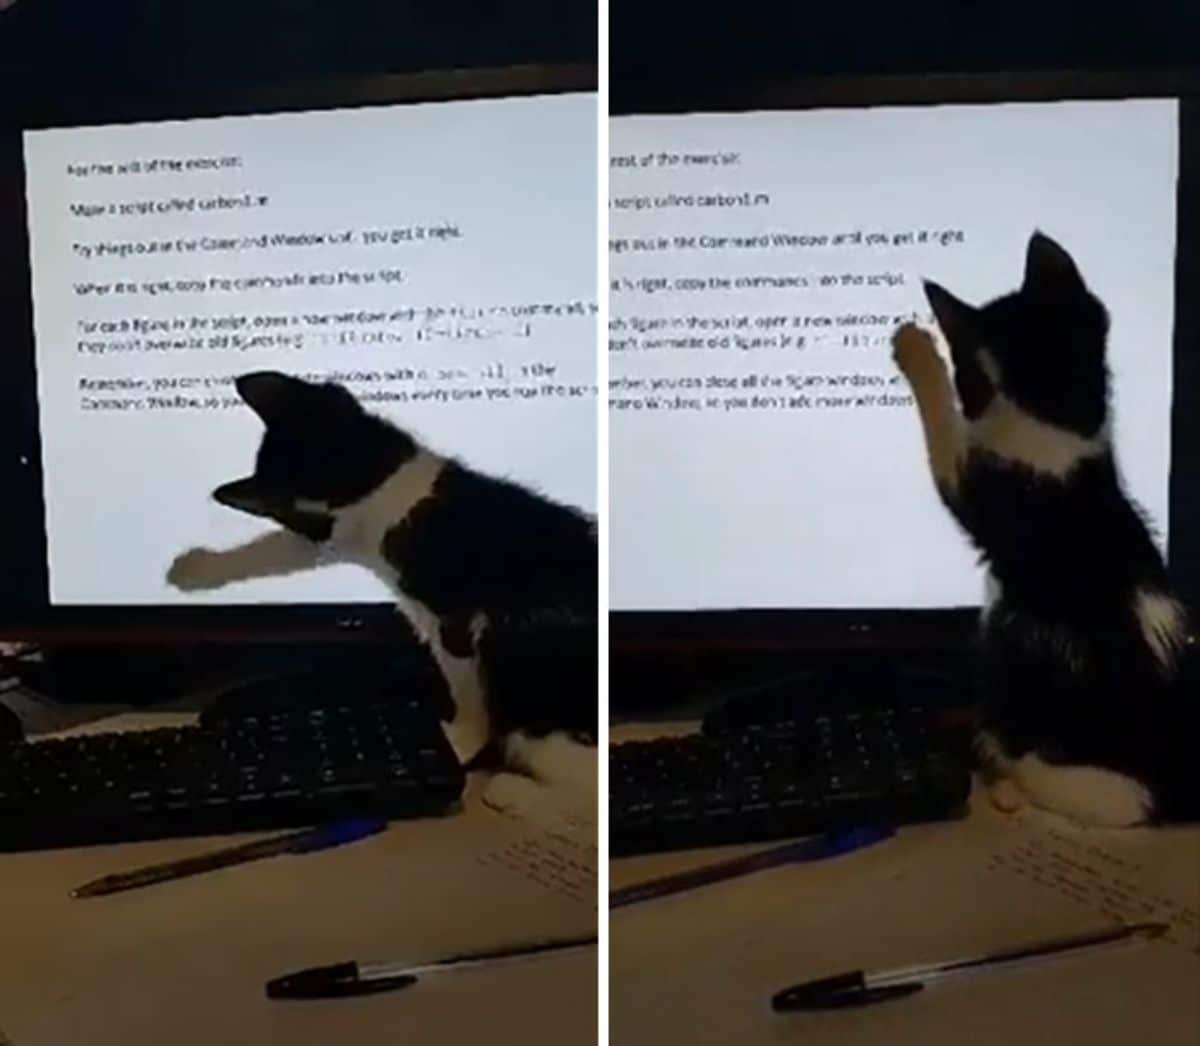 2 photos of a black and white kitten pawing at a computer screen